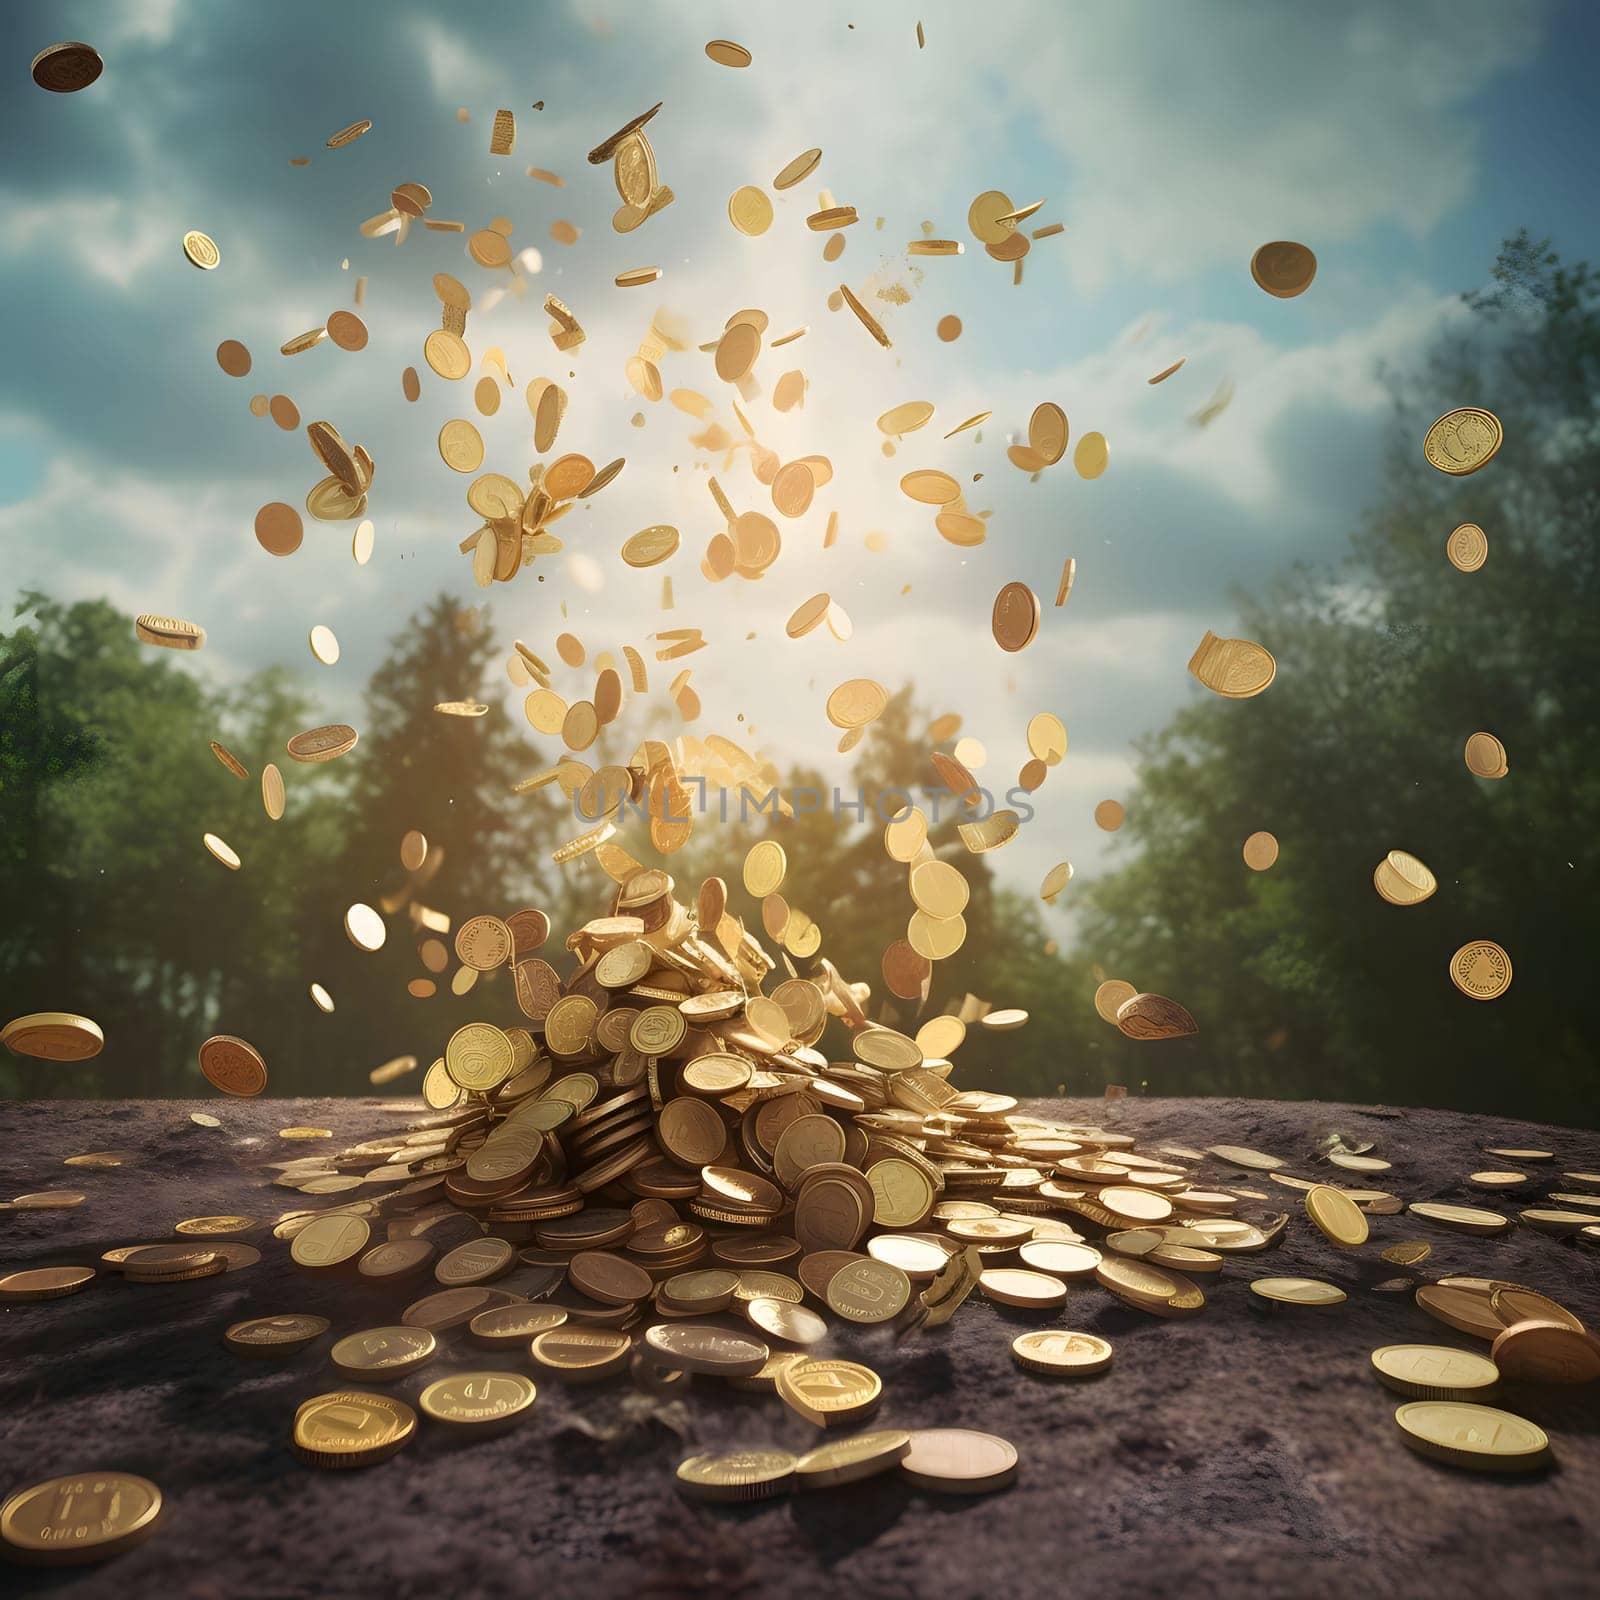 Gold coins falling from the sky to the ground. A pile of coins. Money and currencies.